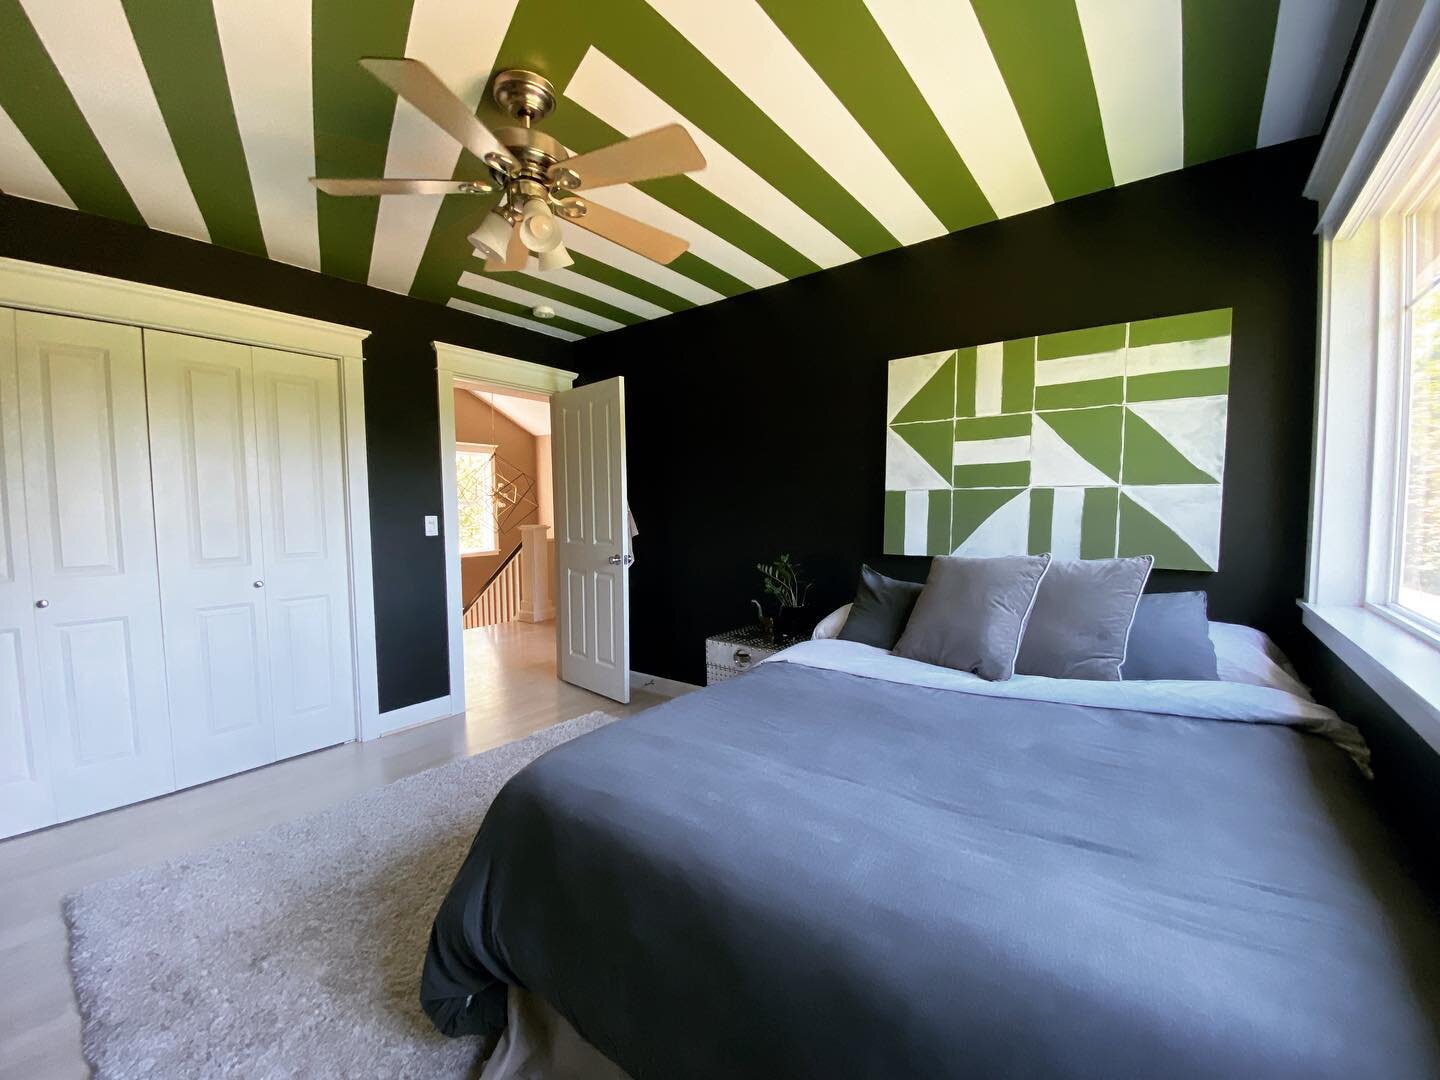 Check out our blog post on how to paint your own ceilings. #paint #ceiling #homedesign #dyi #kidsbedroom #boybedroom #bainbridgeisland #kitsap #silverdale #bremerton #poulsbo